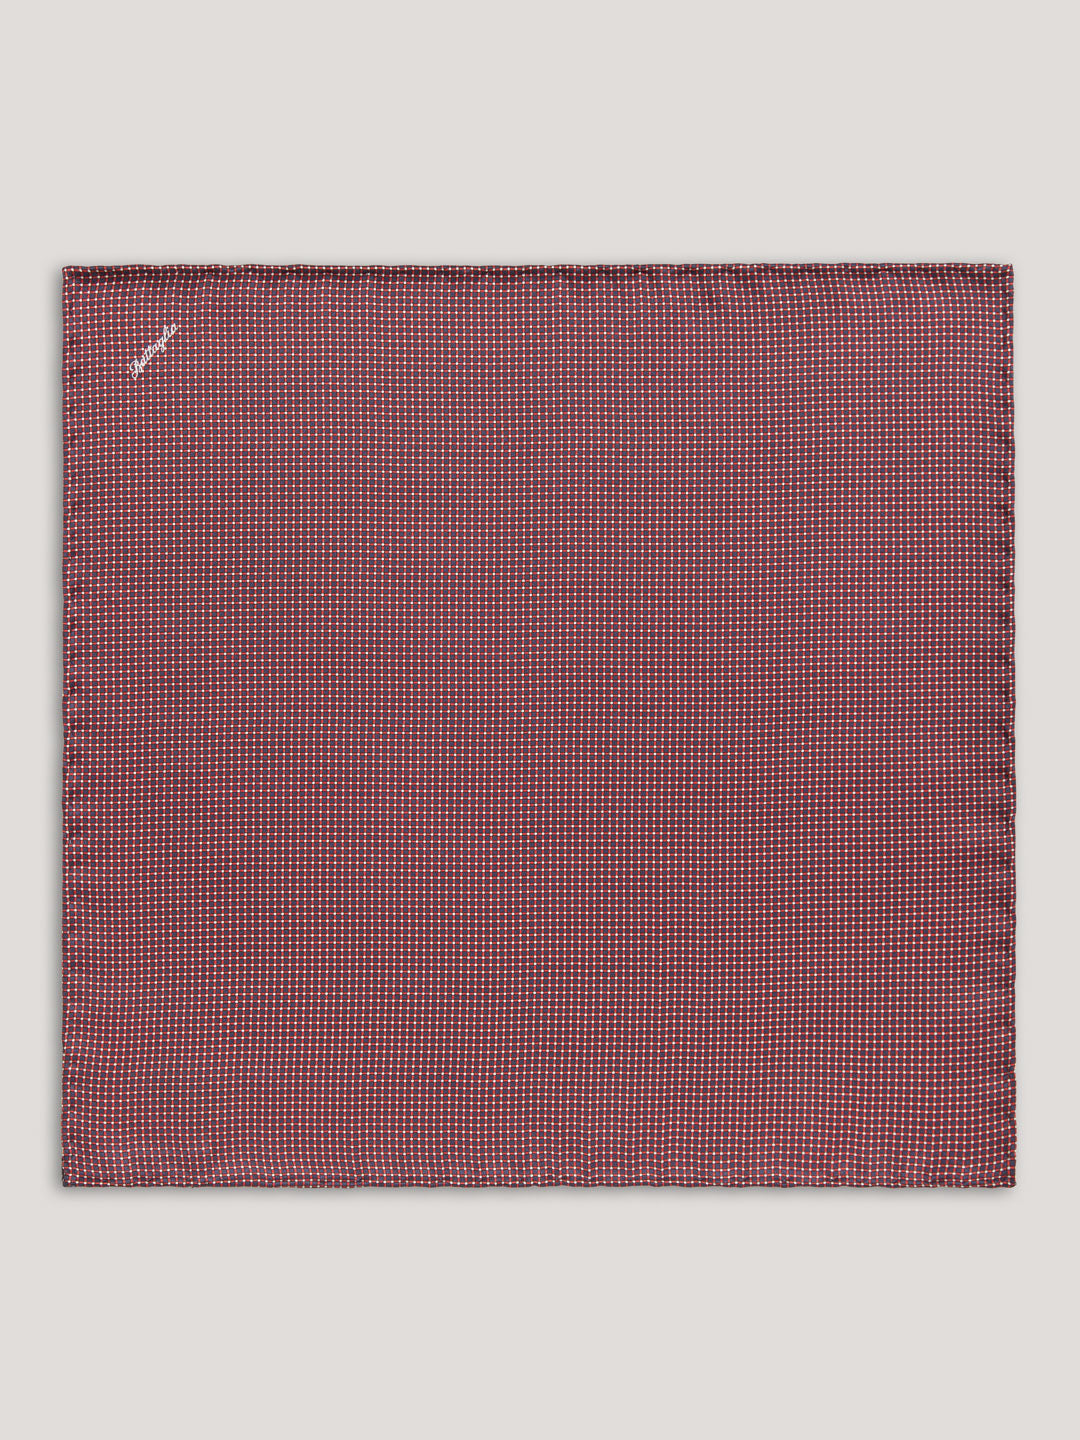 Red handkerchief with small pattern. 